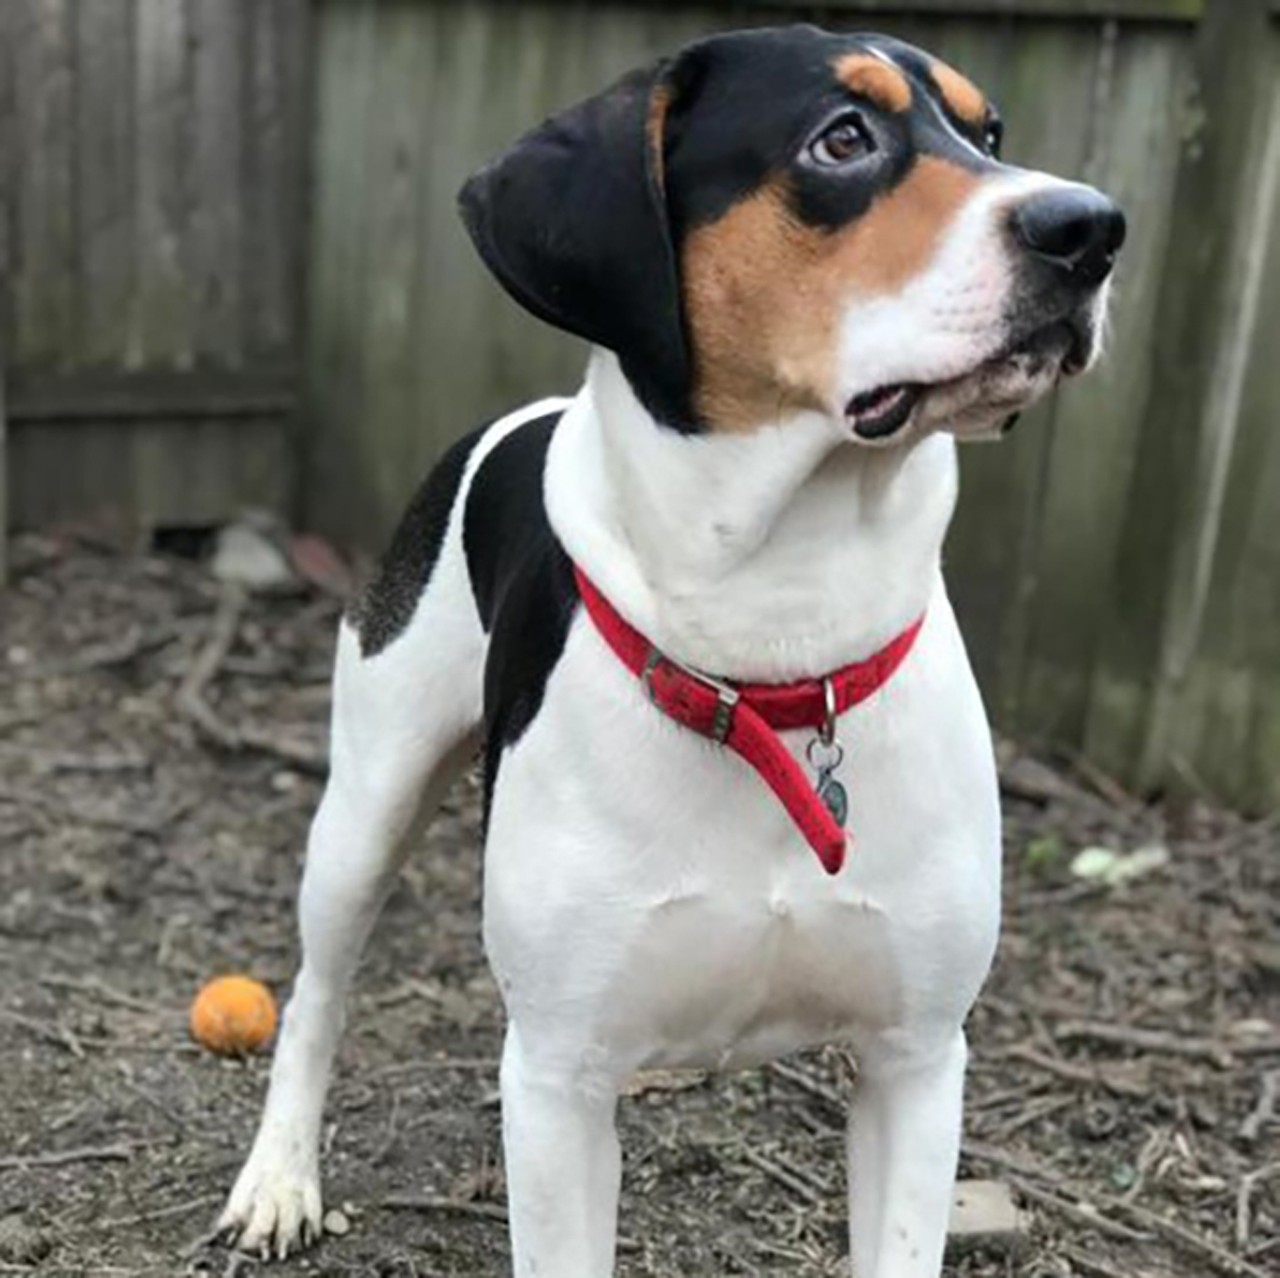 Jesse James
Age: 1 year old | Breed: Treeing Walker Coonhound | Sex: Male | Rescue: Dream House Rescue 
Photo via dreamhouserescue.org